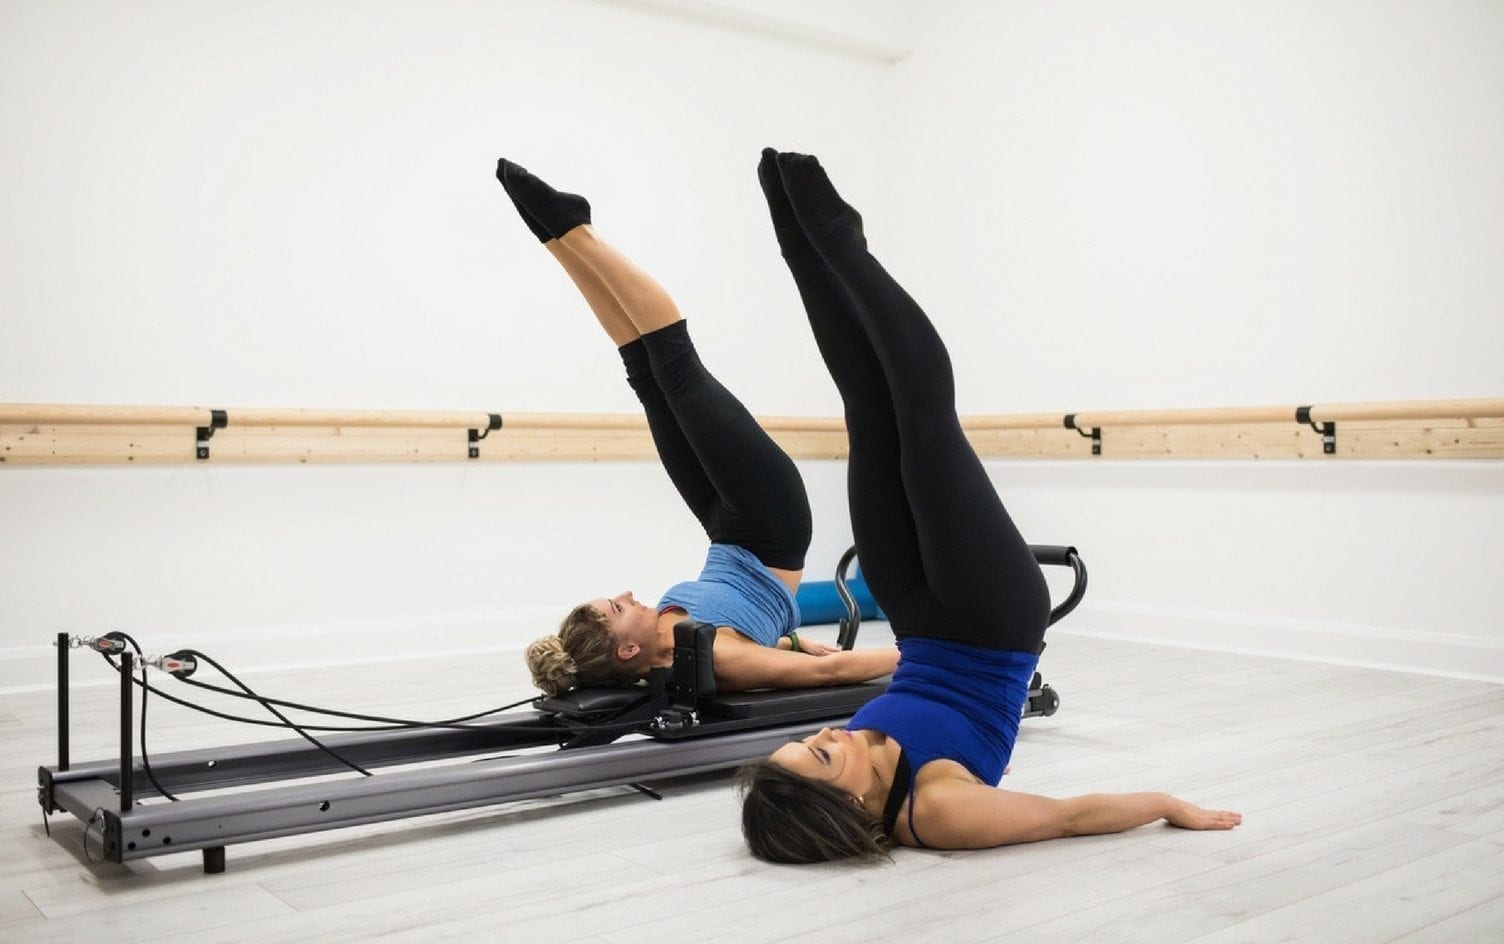 Pilates Types: 5 Types of Pilates and How They are Different From